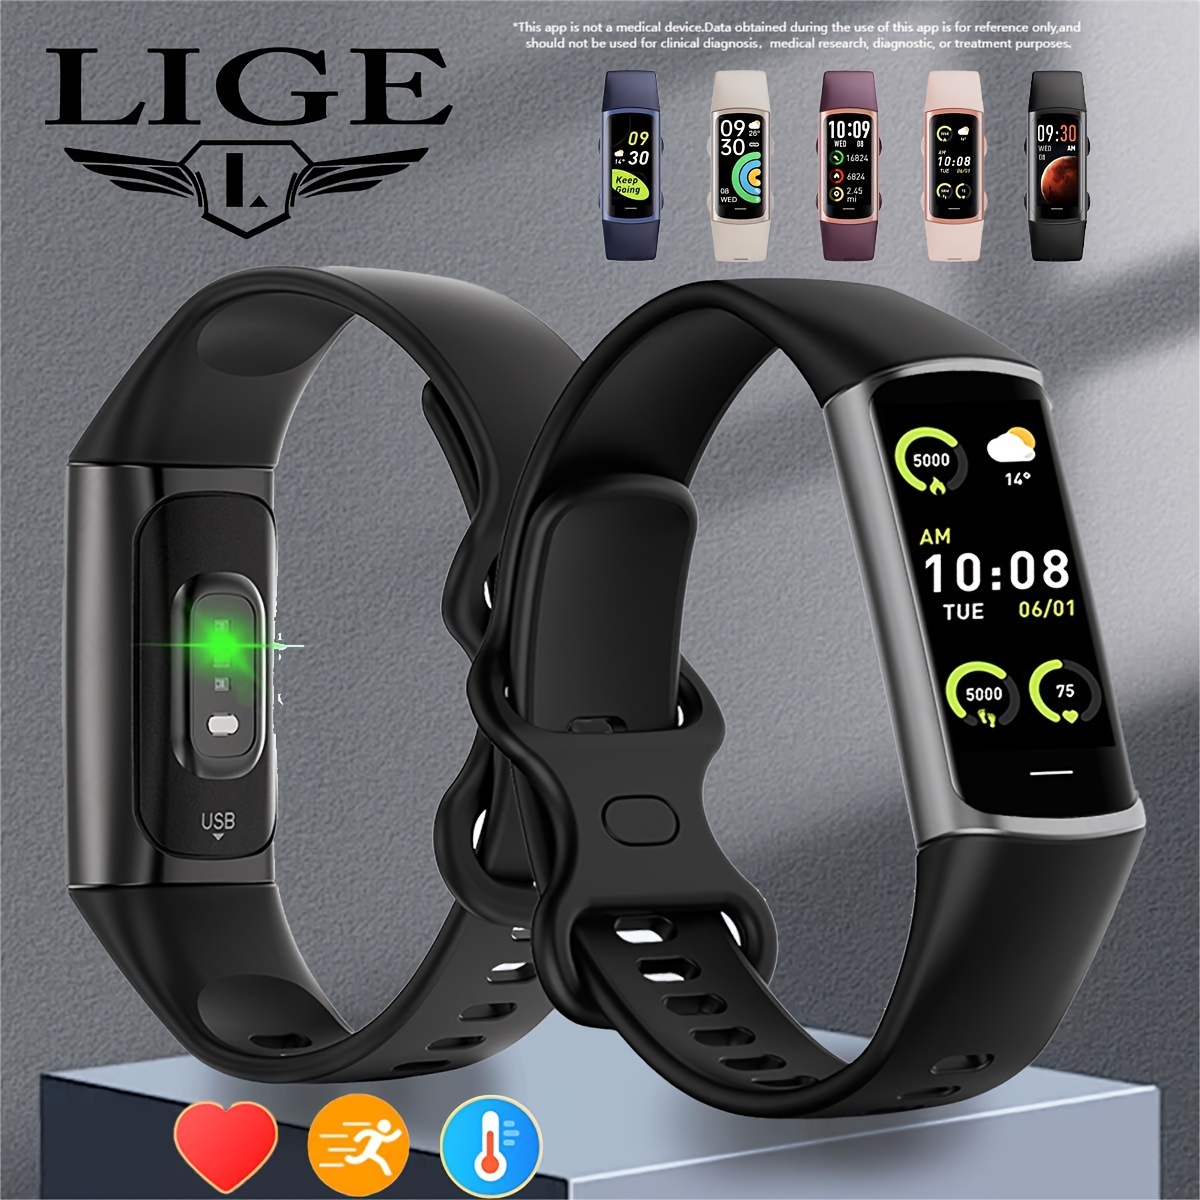 

Smart Watch Fitness /sports Mode/compact And Portable/full Color Screen/replaceable Wristband/long Battery Life/listen To Music/read Information/weather/data